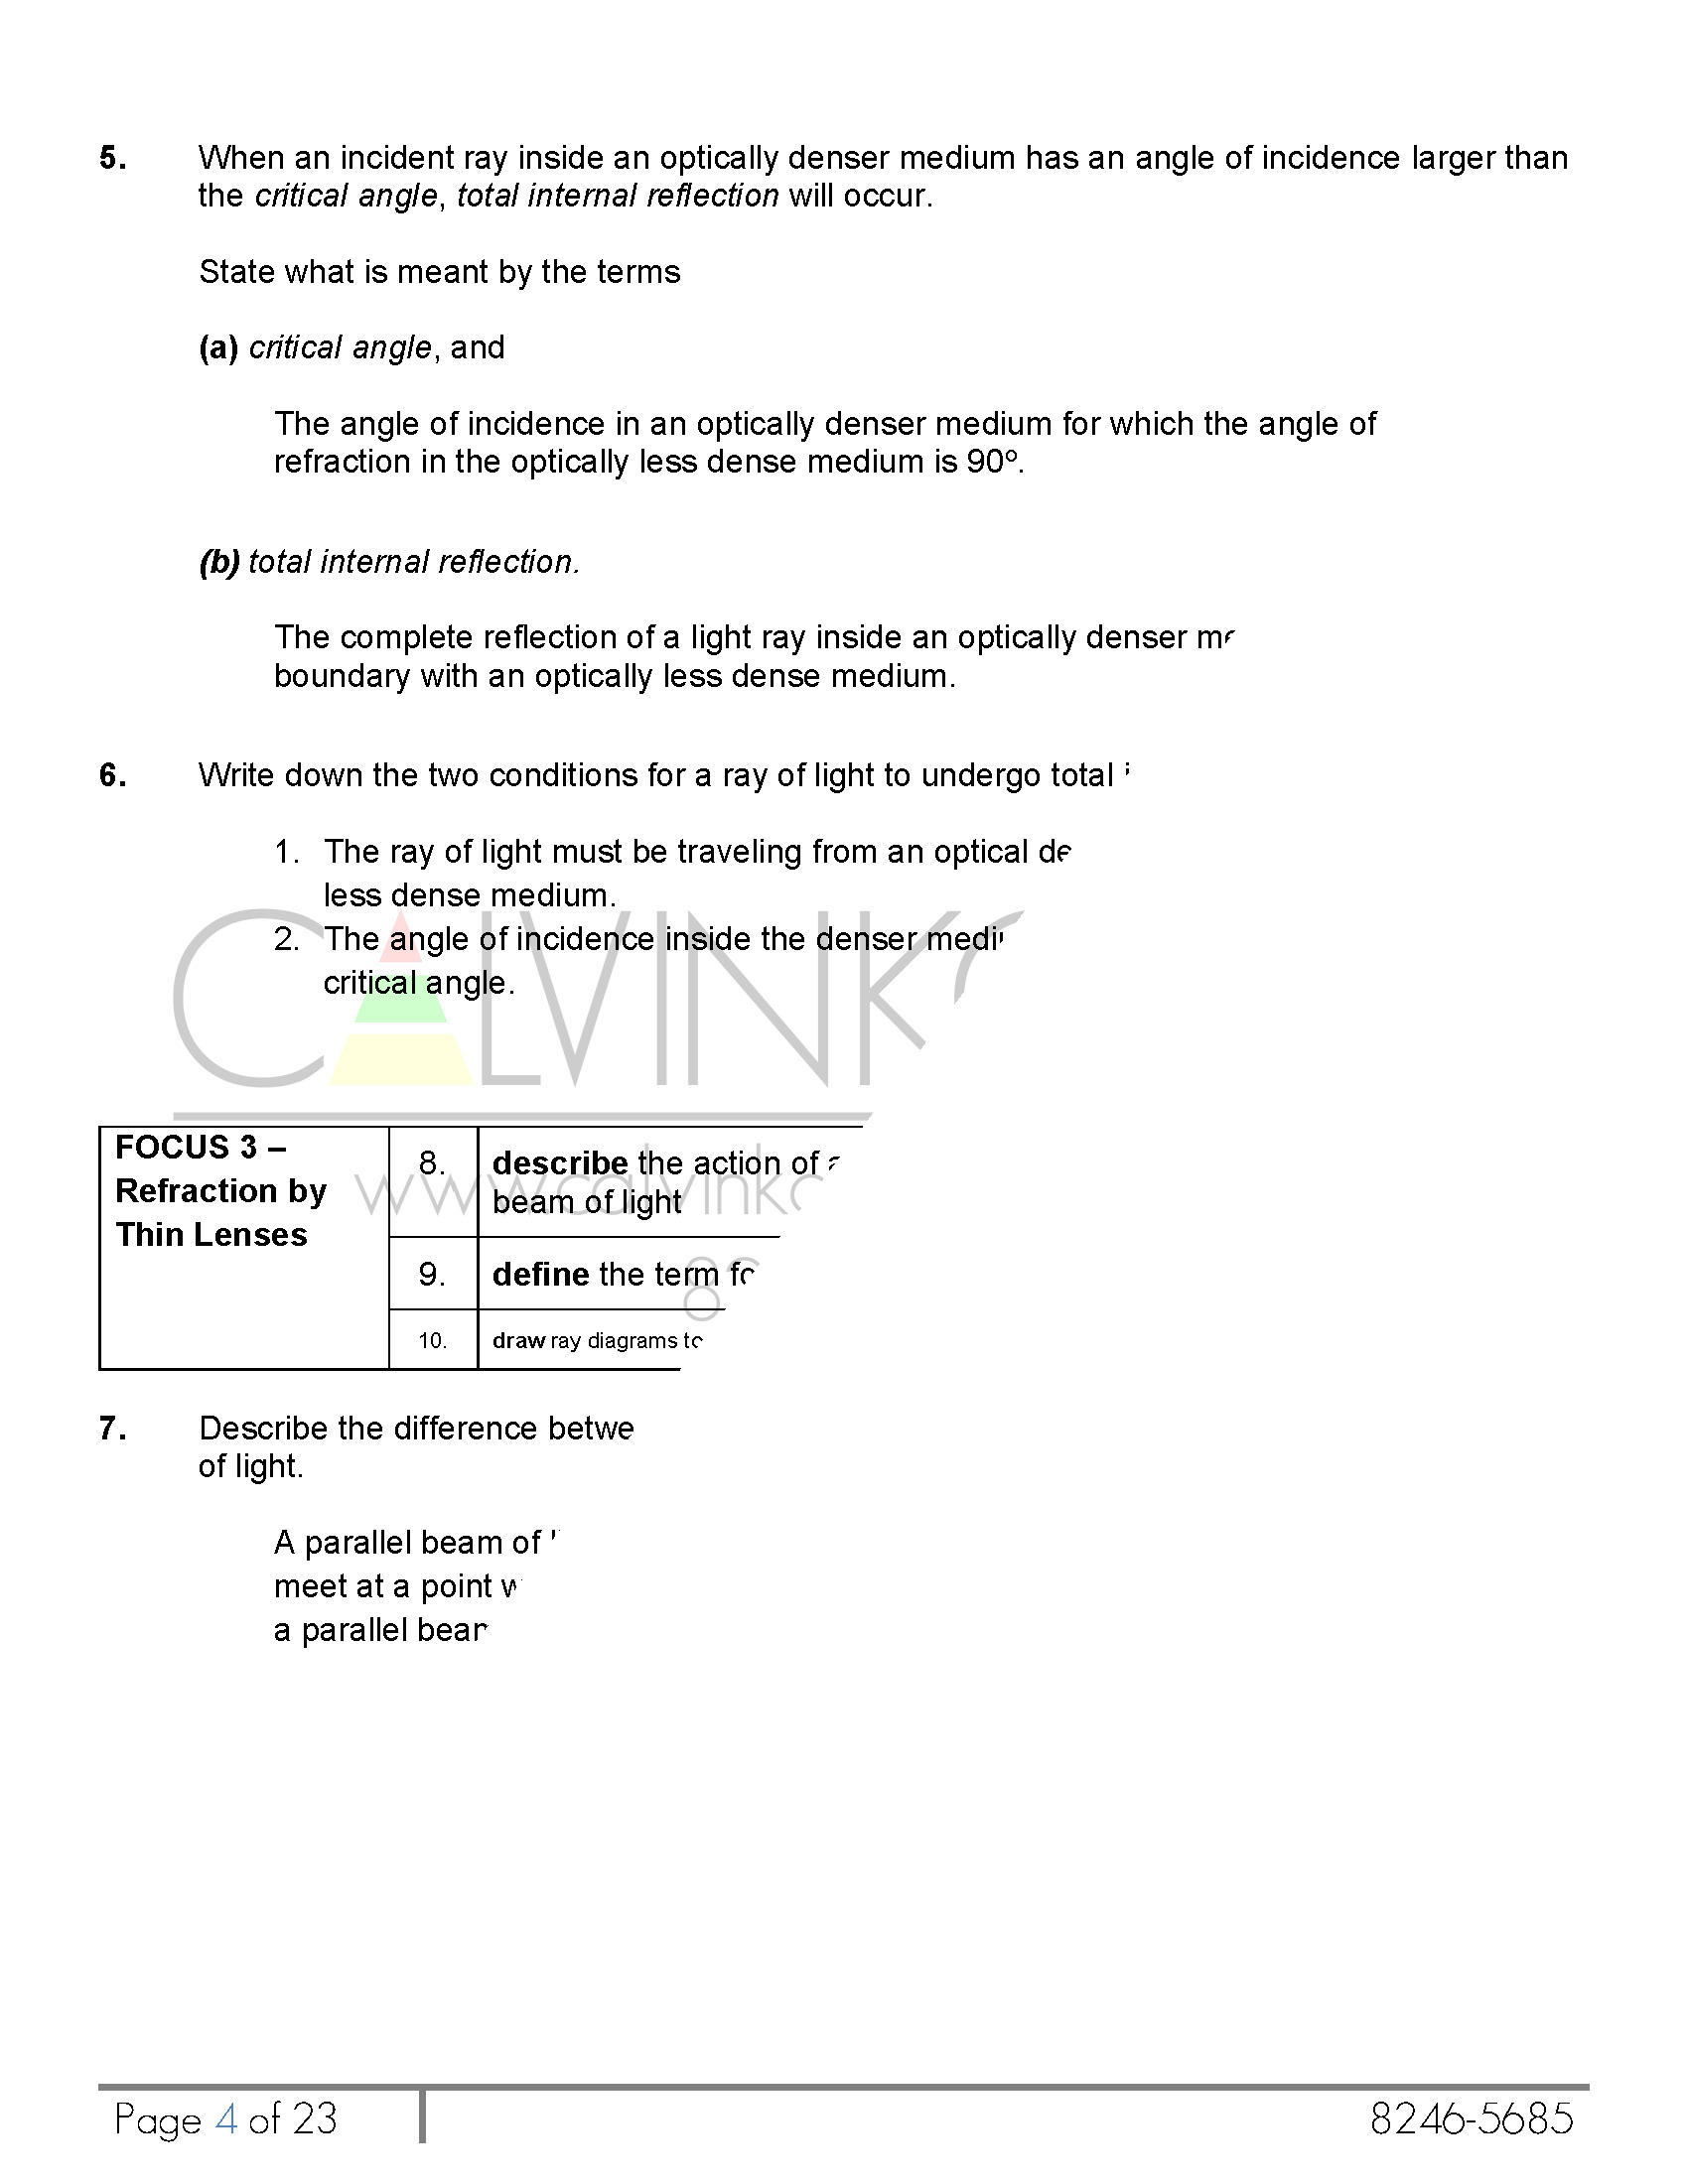 03. Unit 12 - Light  - Consolidation WS Part 1 (Review and Discussion) w Ans Sample_Page_04.jpg